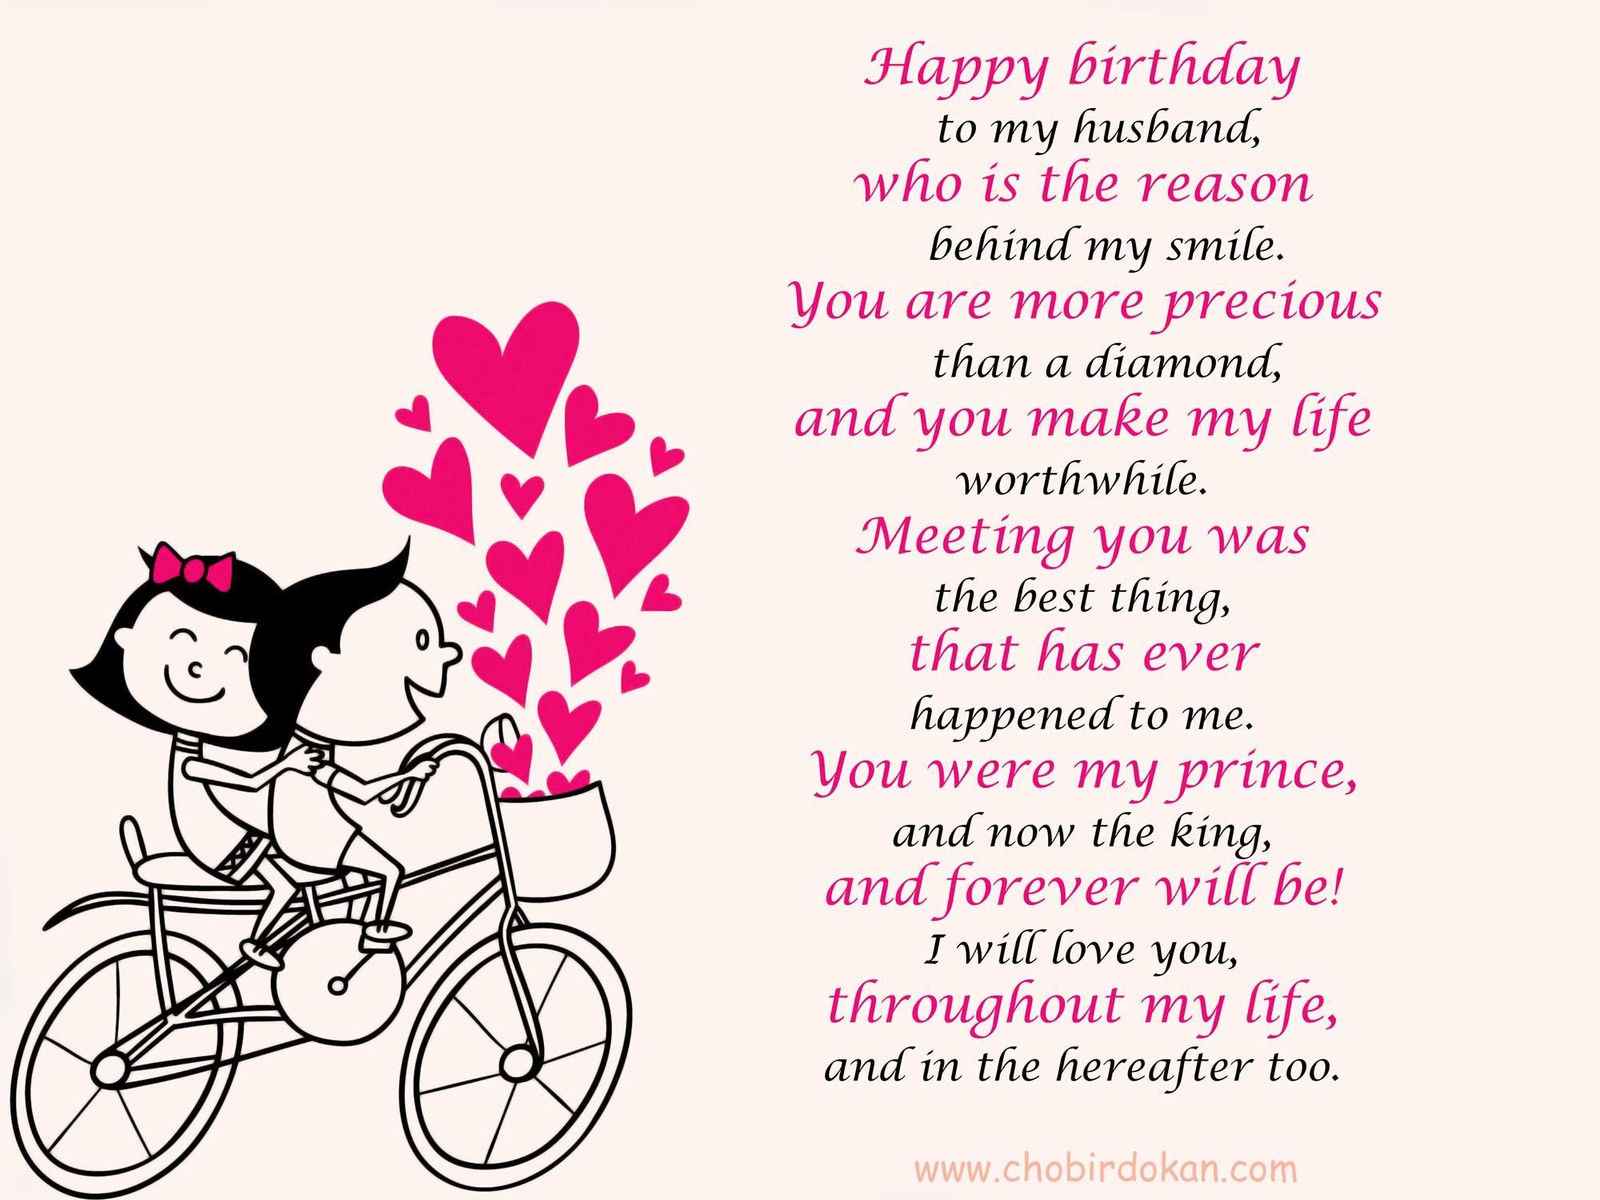 Happy birthday poems for him cute poetry for boyfriend or...